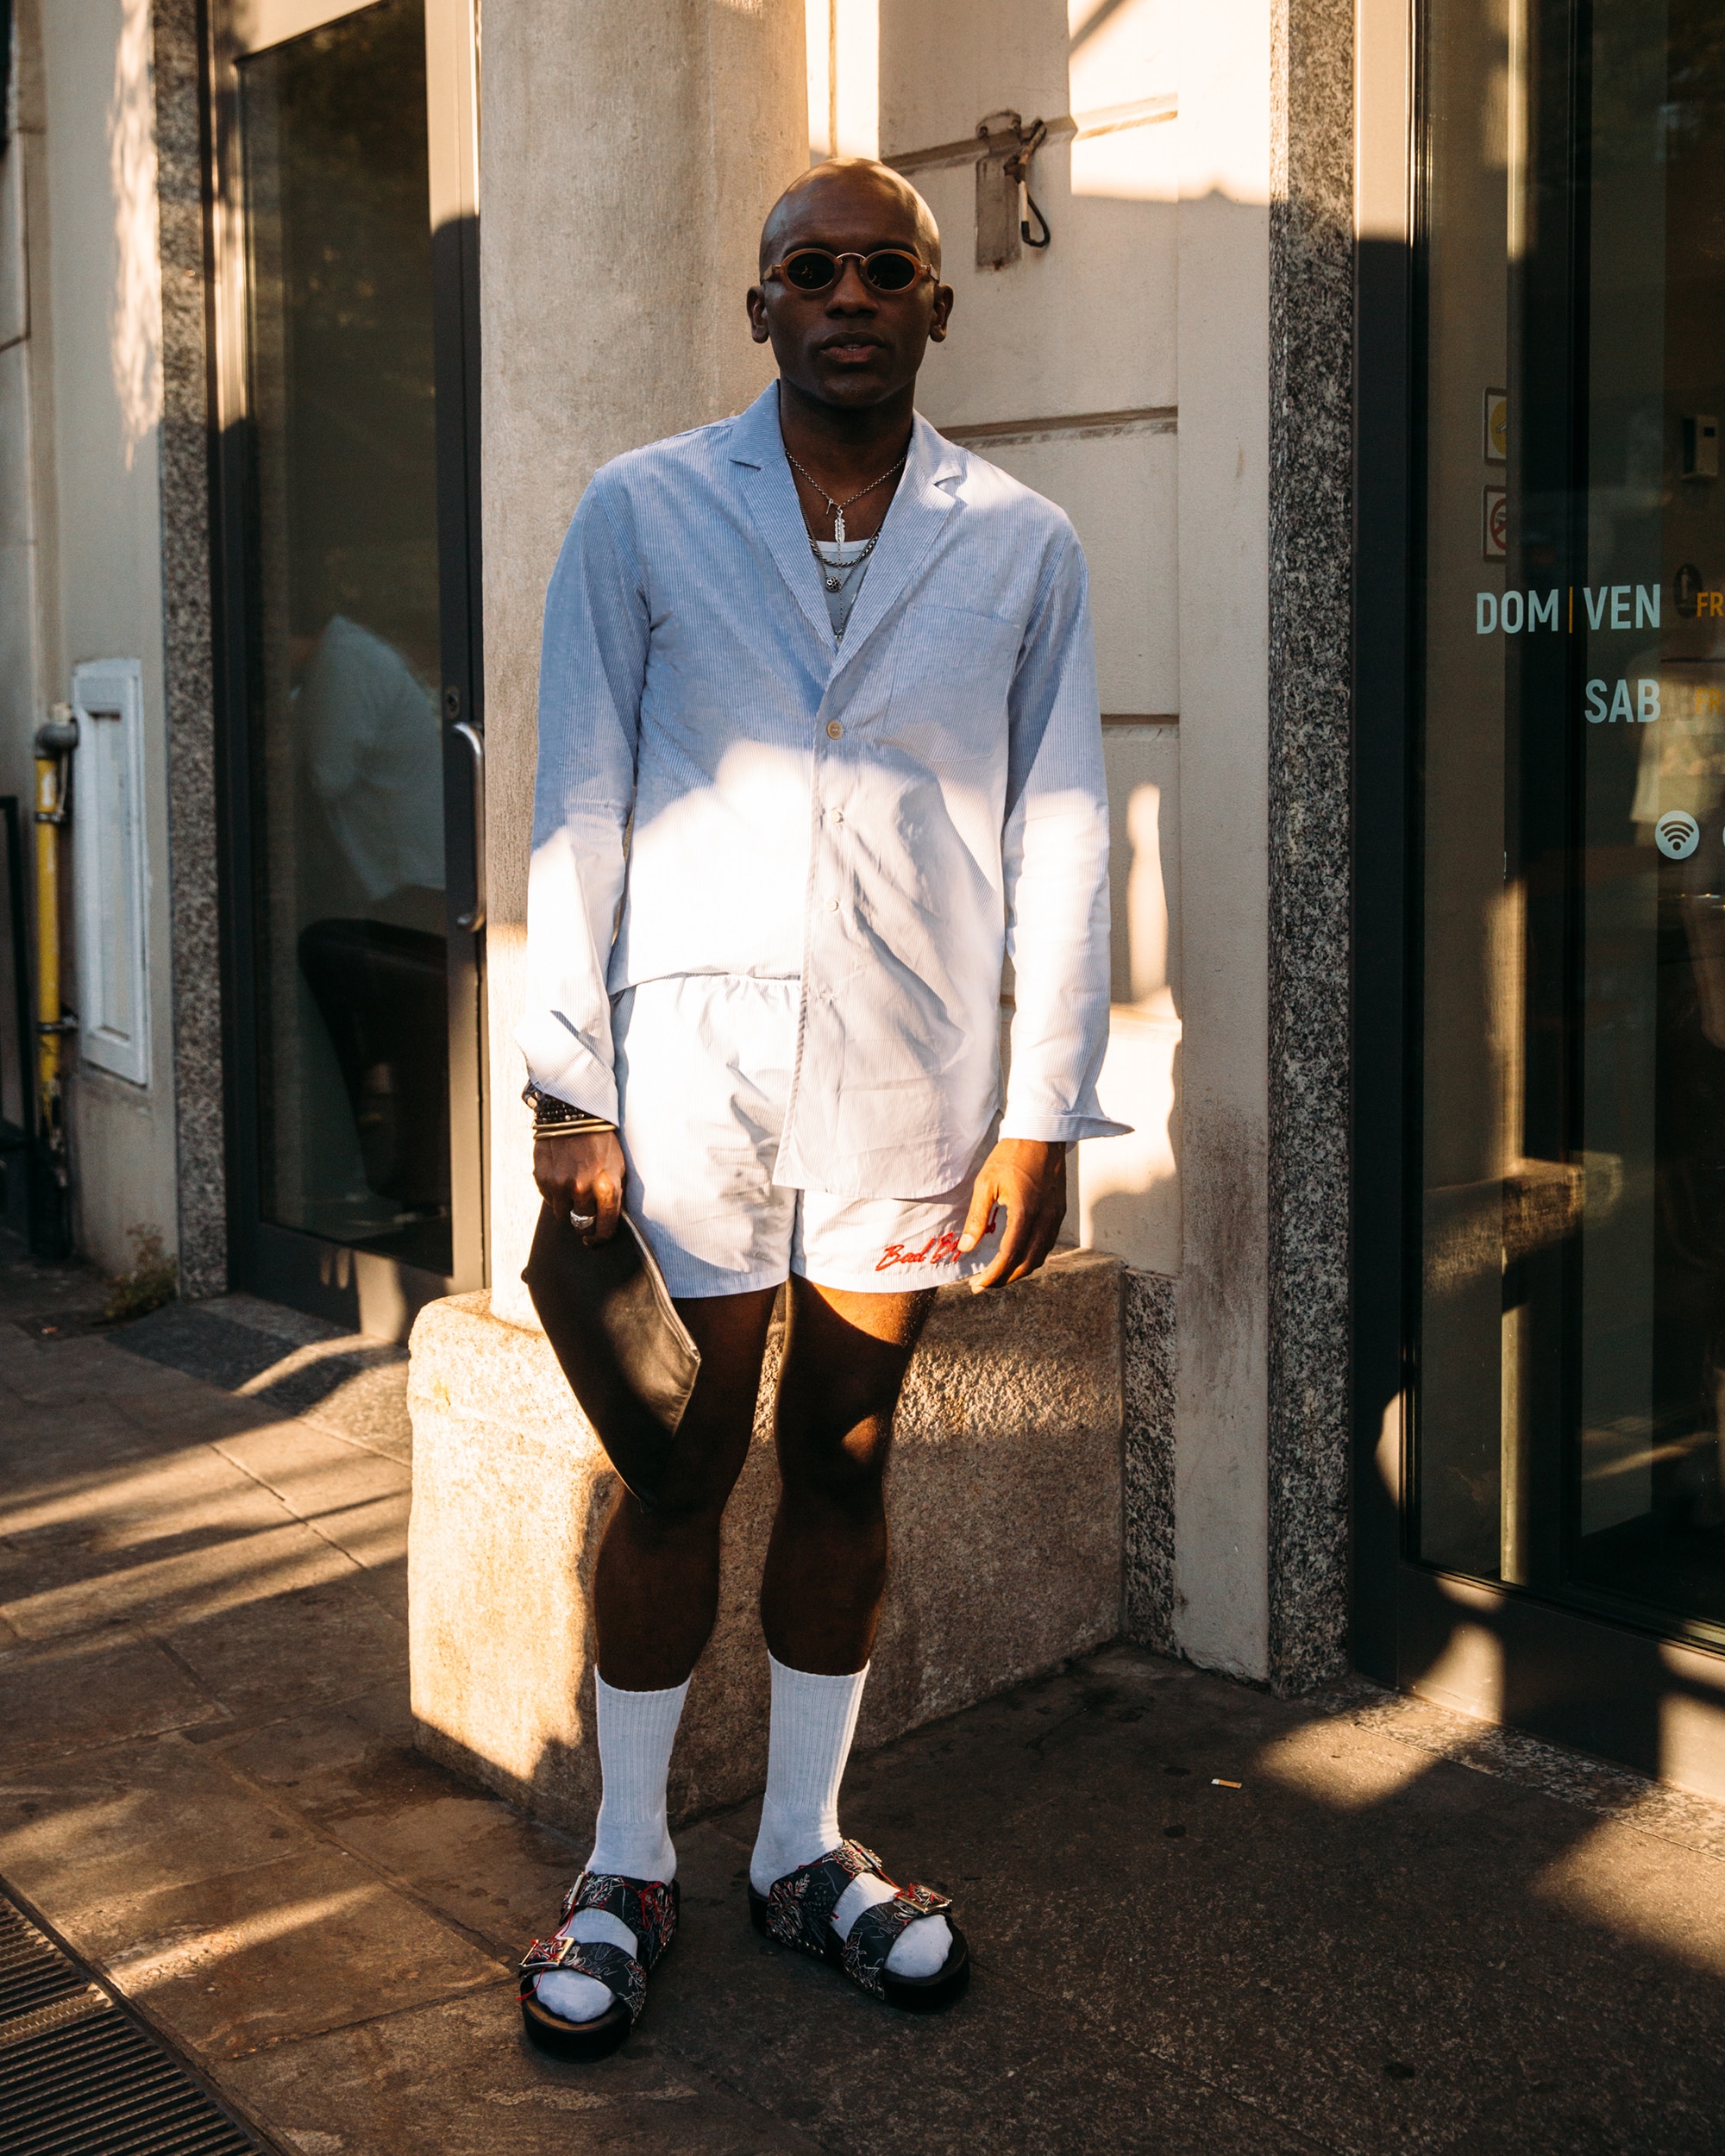 Stylish Gent's Guide To Wearing Socks Sandals | The Journal MR PORTER